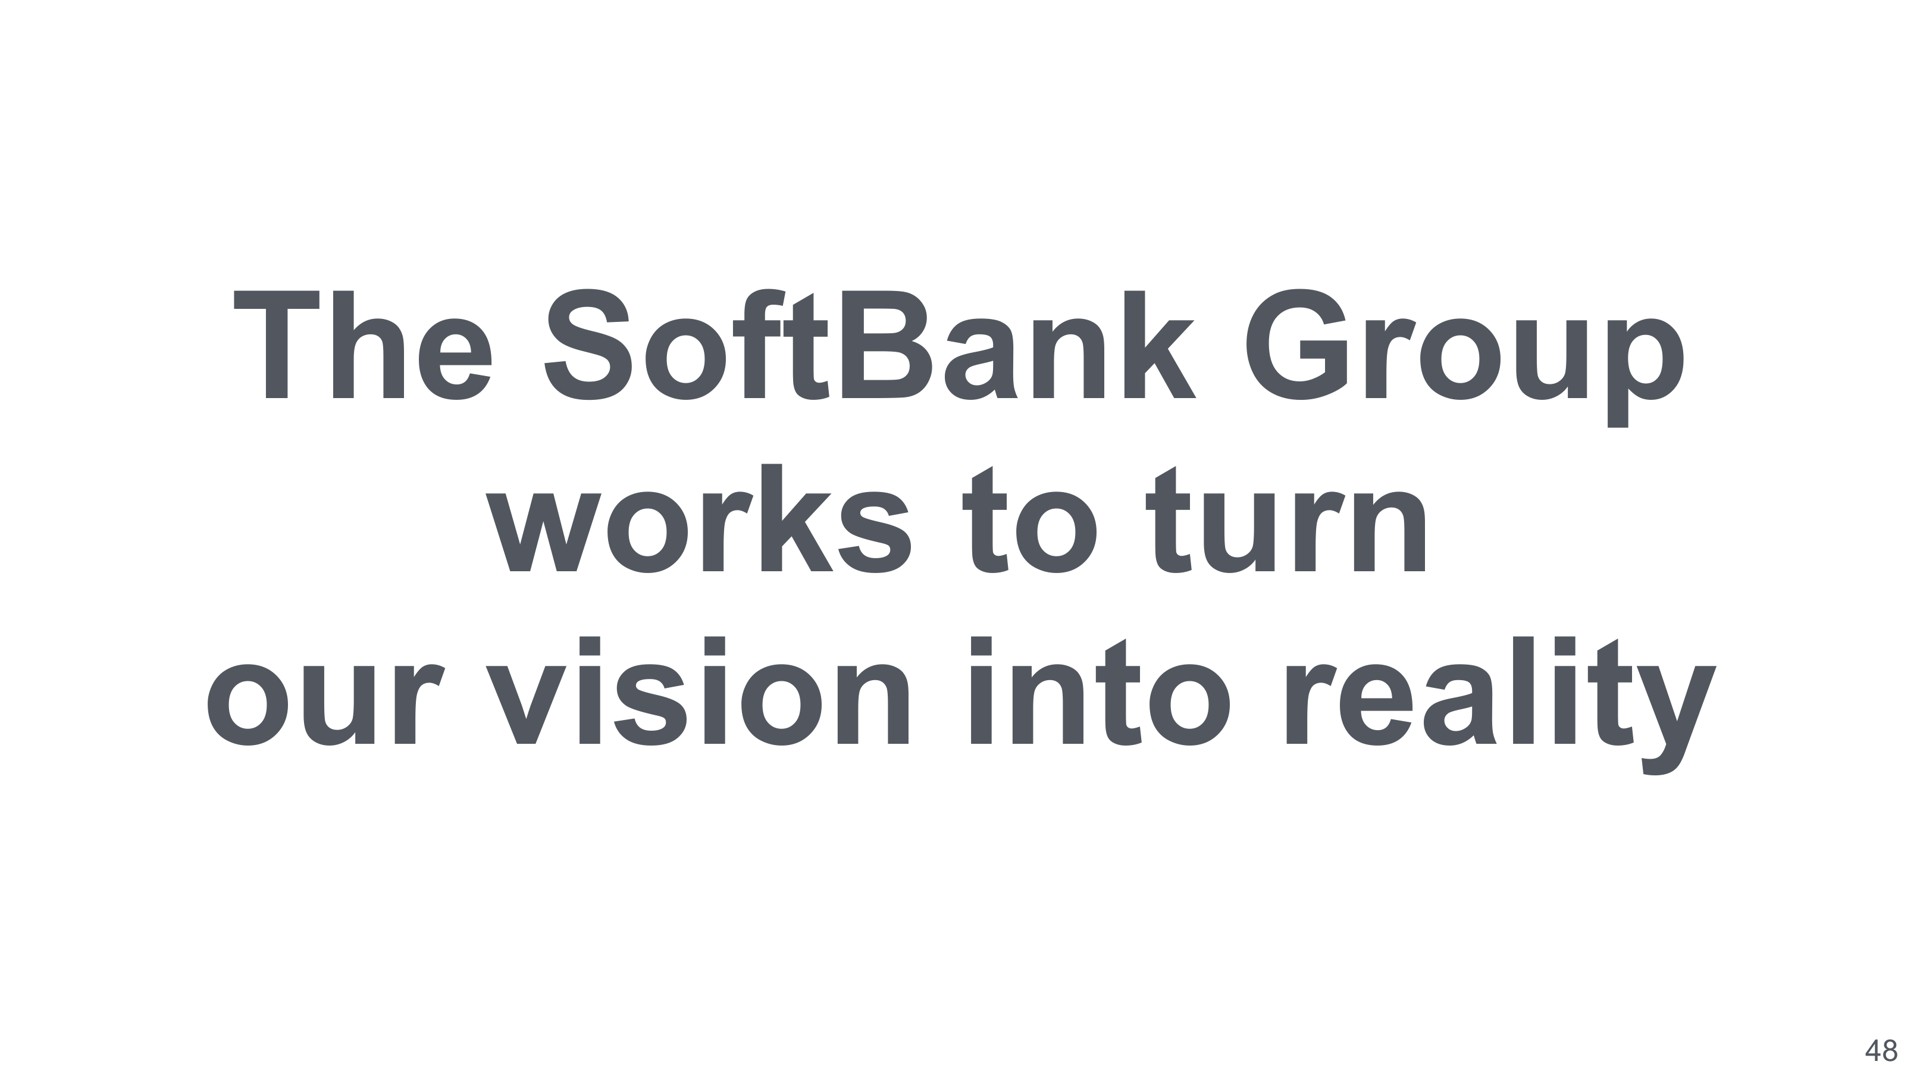 the group works to turn our vision into reality | SoftBank